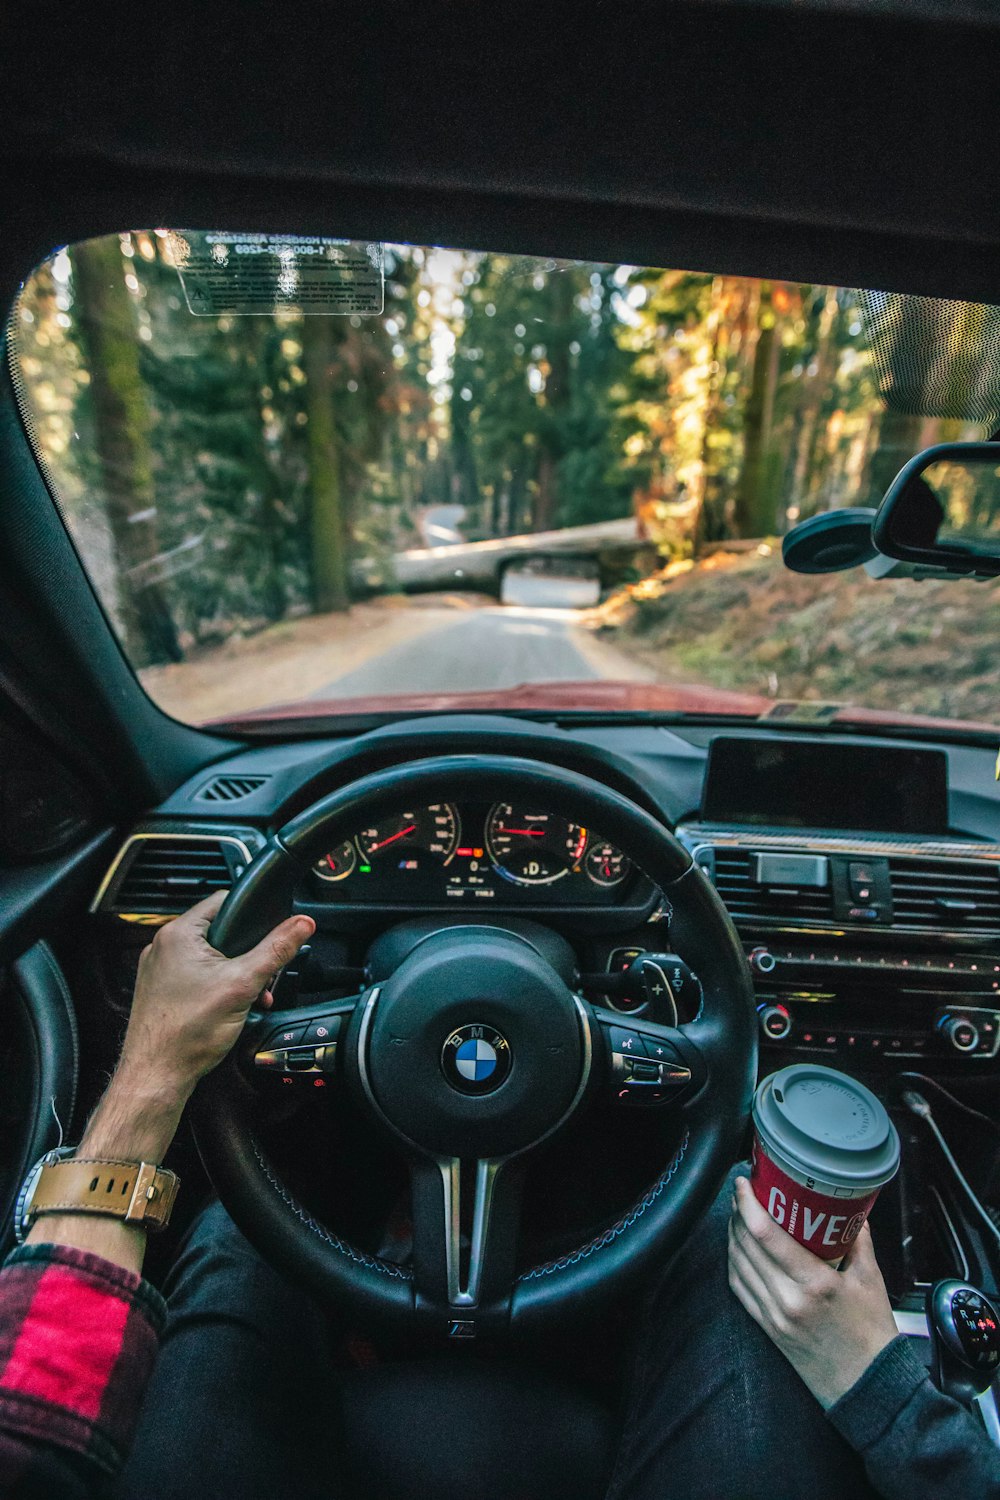 500 Bmw M3 Pictures Download Free Images & Stock Photos on Unsplash